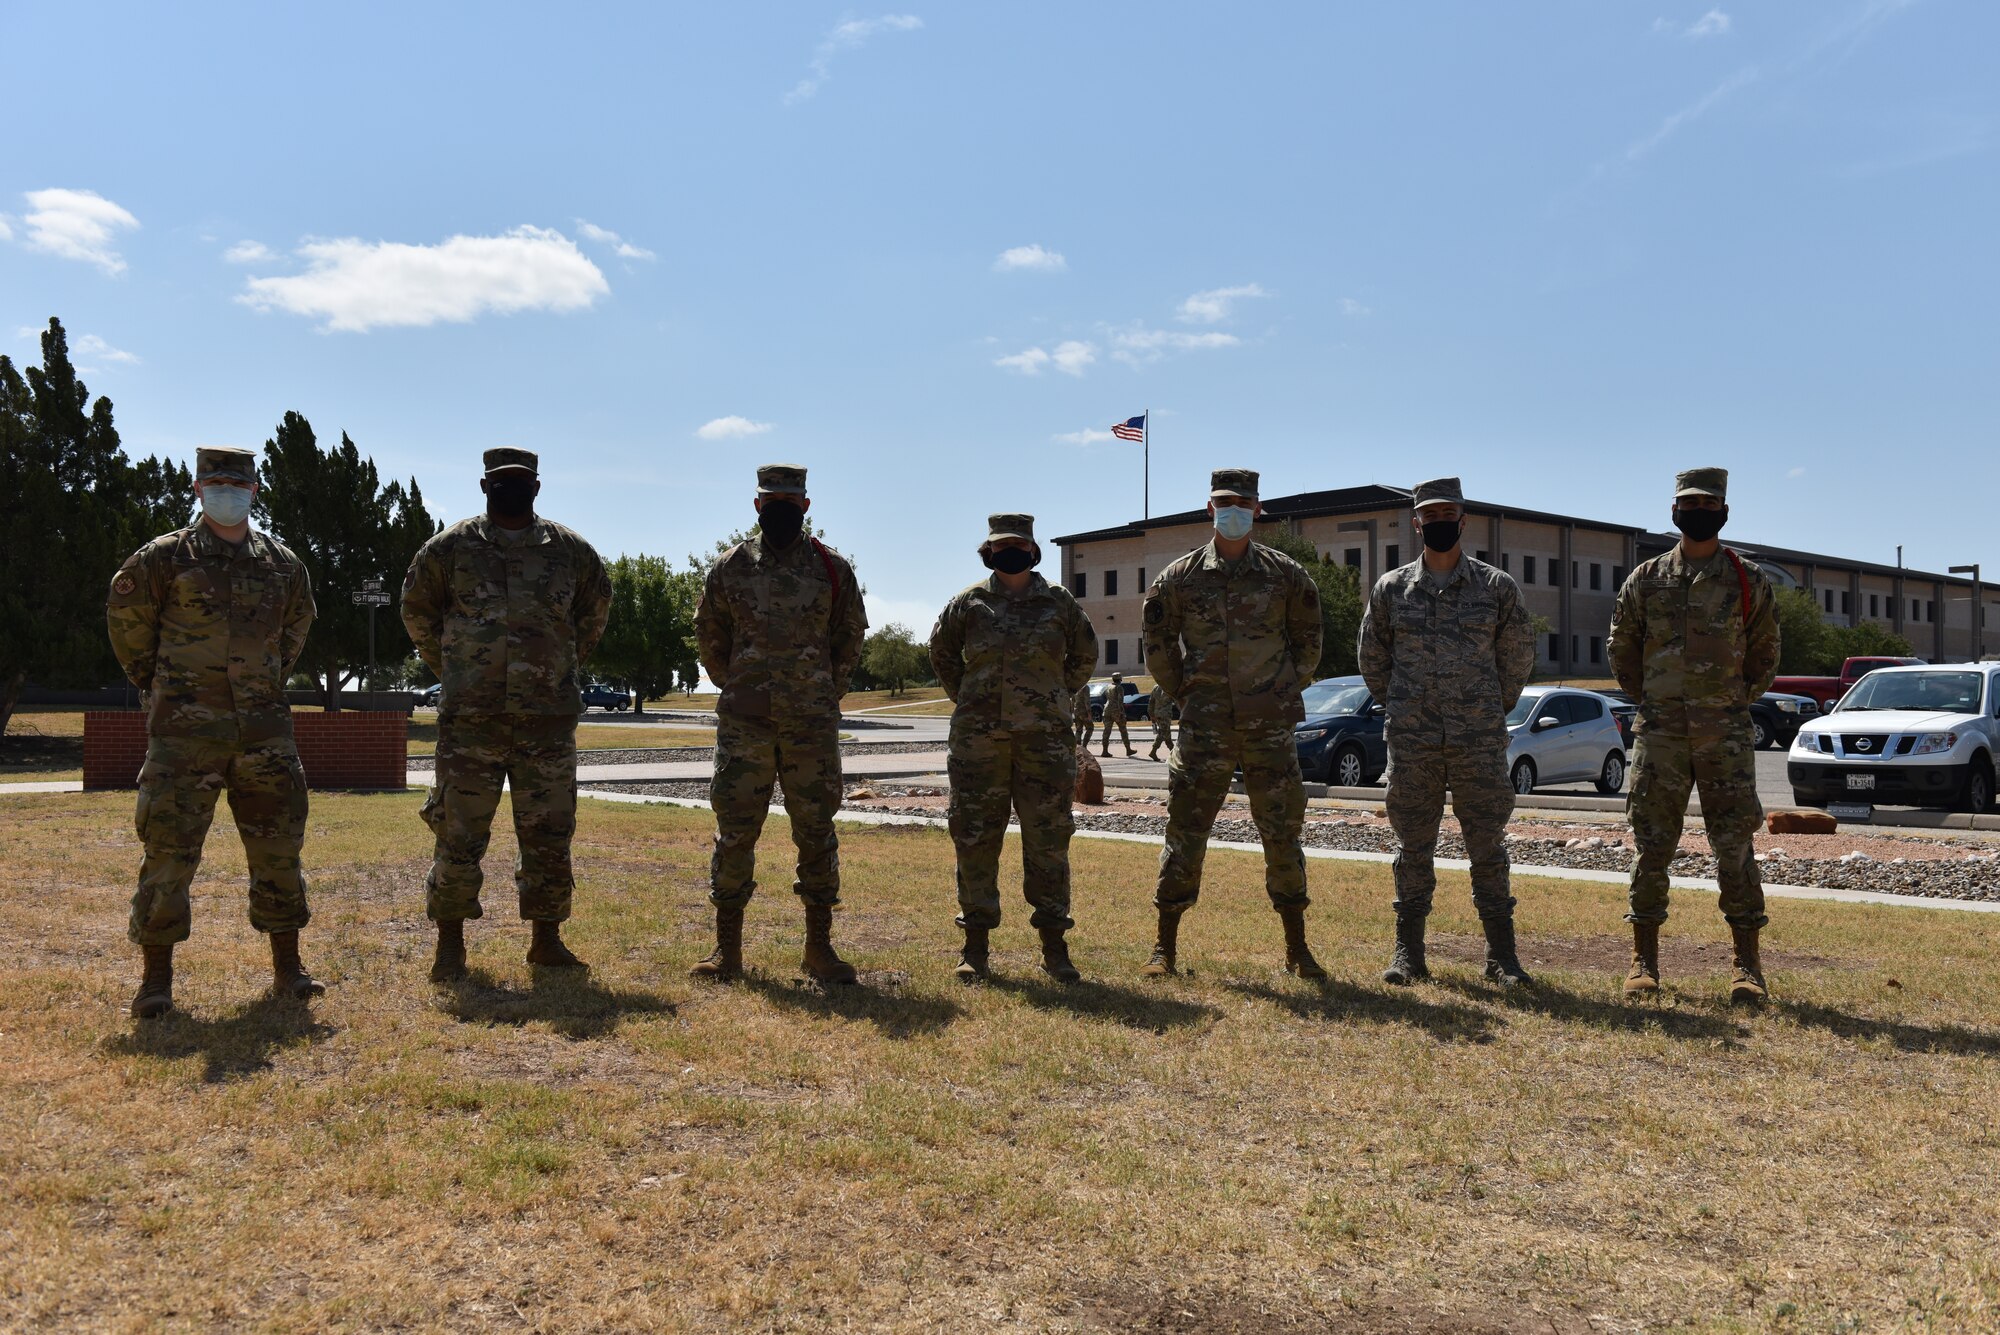 U.S. Air Force Col. Angelina Maguinness, 17th Training Group commander, and Chief Master Sgt. Charmane Tatum, 17th TRG superintendent, stand with the Student of the Month winners outside of Brandenburg Hall at Goodfellow, Texas, Aug. 7, 2020. The Student and Rope of the Month awards are given to those students who have distinguished themselves in courses and by leading others. (U.S. Air Force photo by Staff Sgt. Seraiah Wolf)